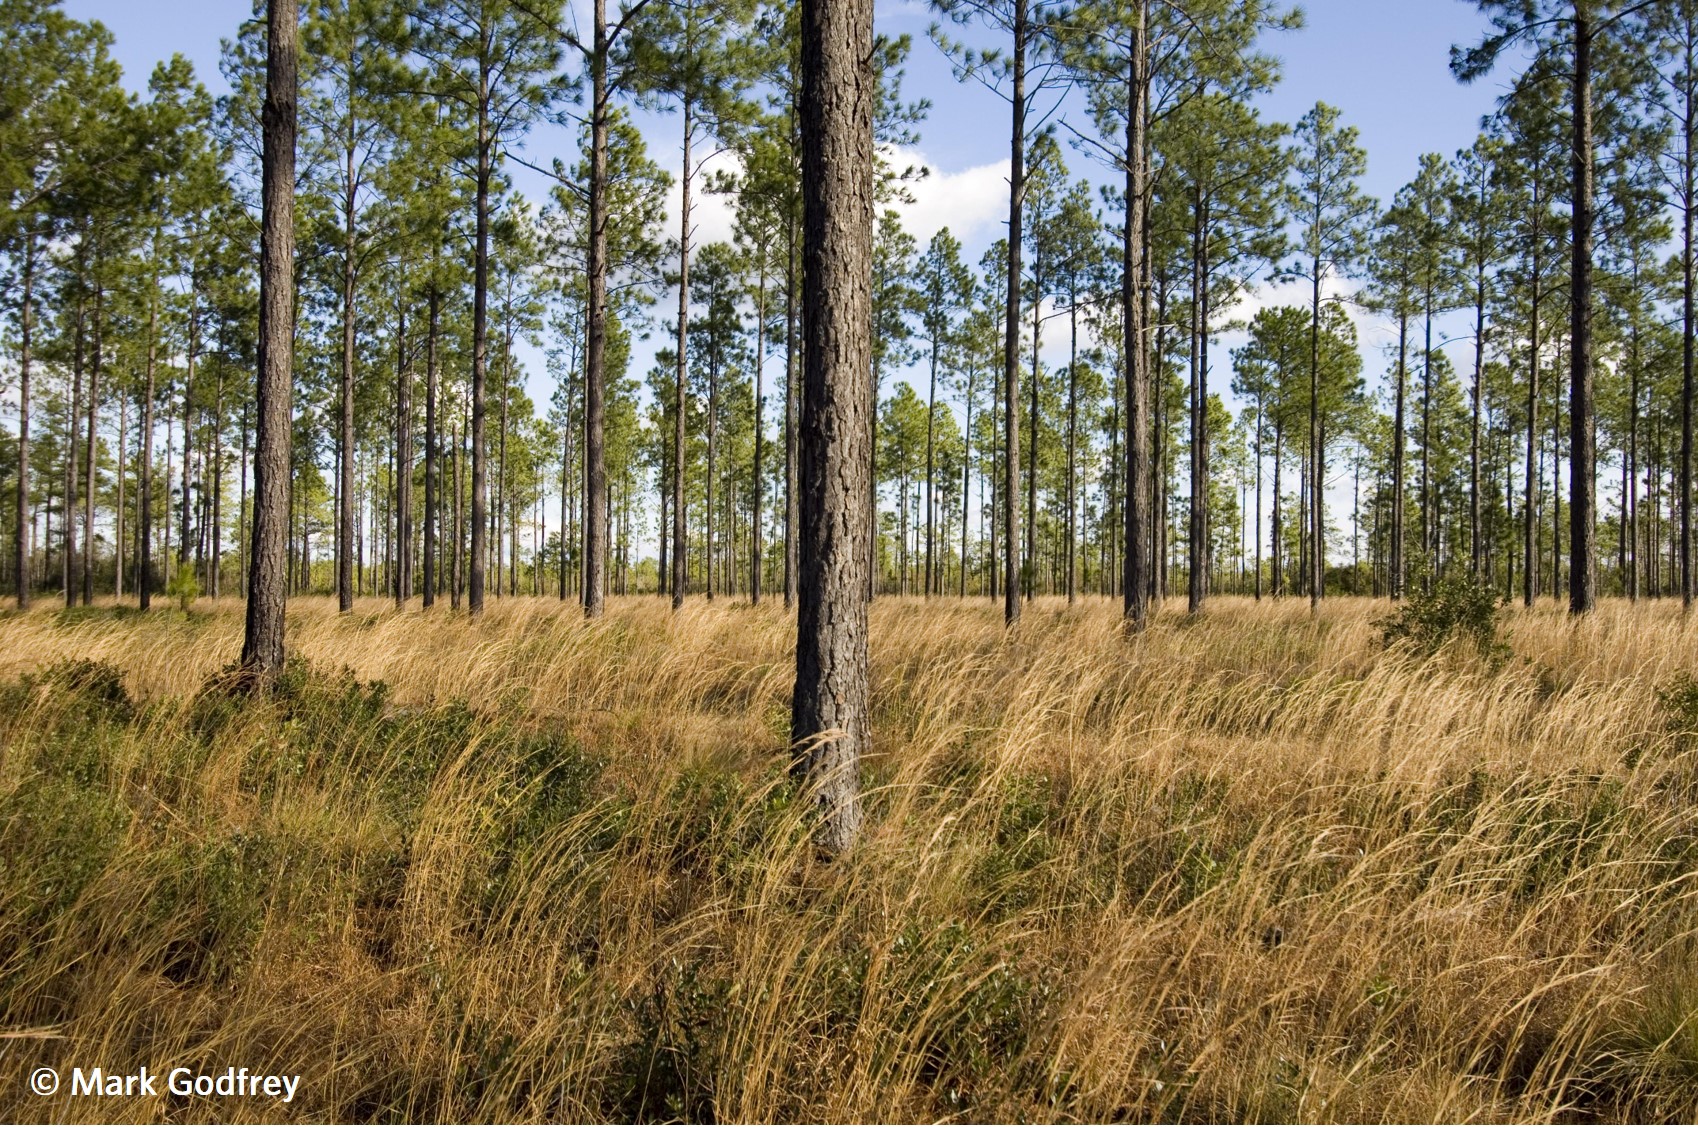 North Carolina savanna with tall, spaced out trees and a golden grassed understory. Image copyright Mark Godfrey